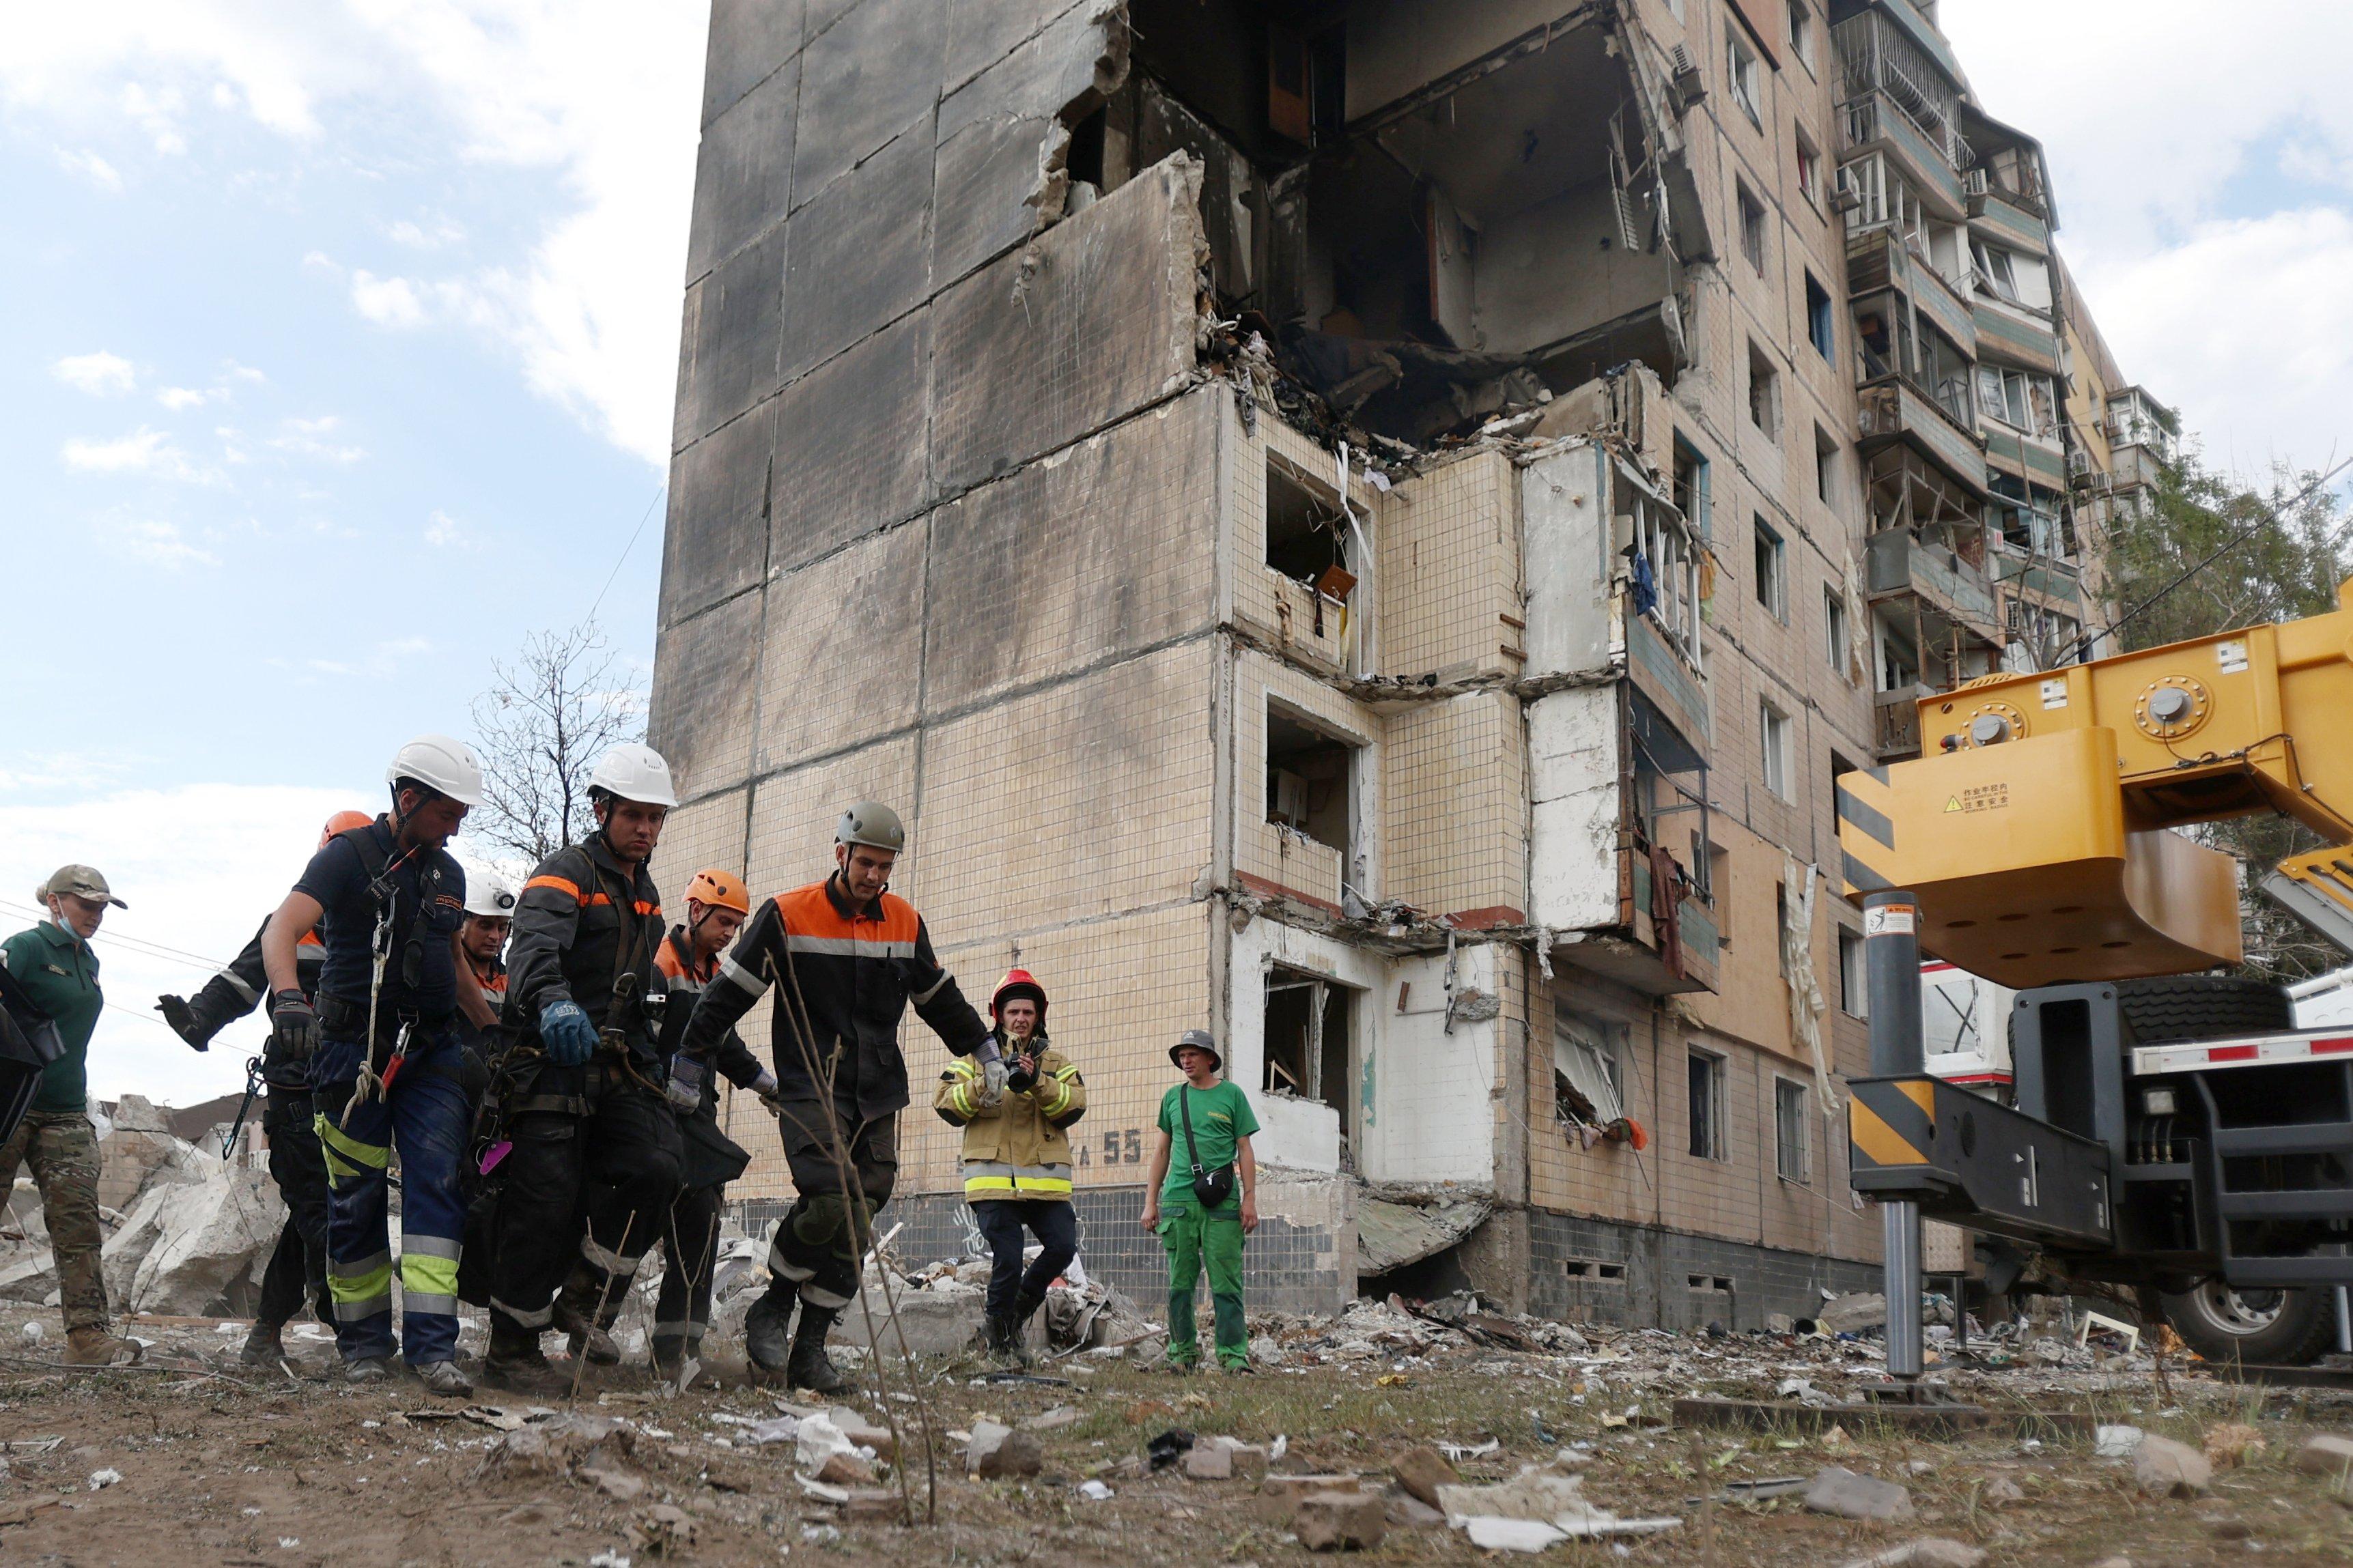 Rescuers carry the body of a resident retrieved after a nine-storey residential building was partially destroyed as a result of Russian missiles strike in Kryvyi Rig on July 31, 2023, amid the Russian invasion of Ukraine. - At least four people were killed including a 10-year-old child after a Russian missile attack on the central Ukrainian city of Kryvyi Rig, officials said. (Photo by Anatolii STEPANOV / AFP)